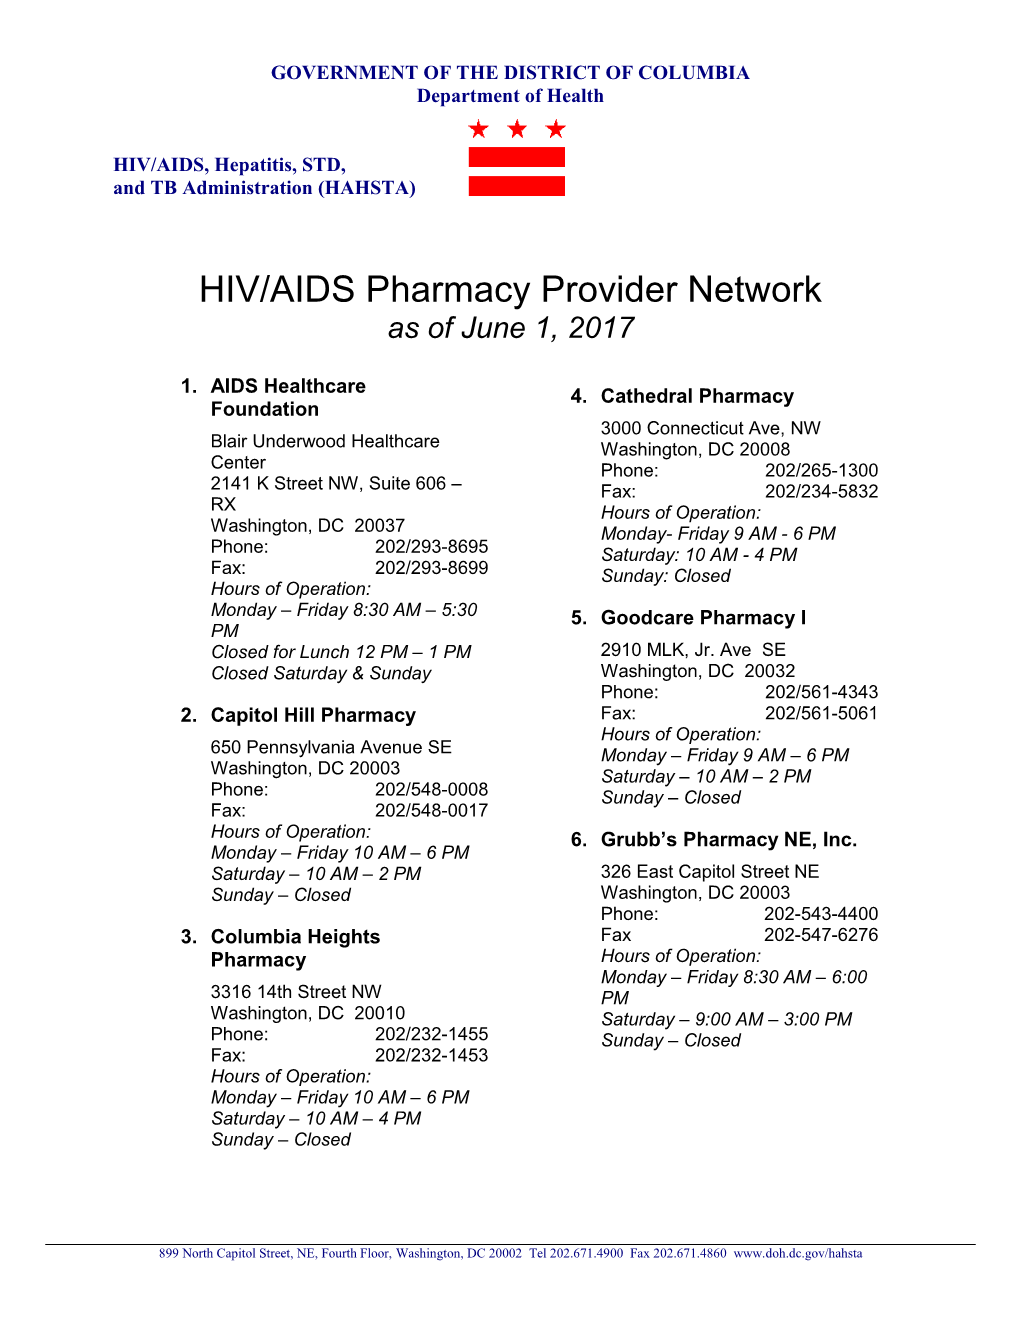 HIV/AIDS Pharmacy Provider Network As of June 1, 2017